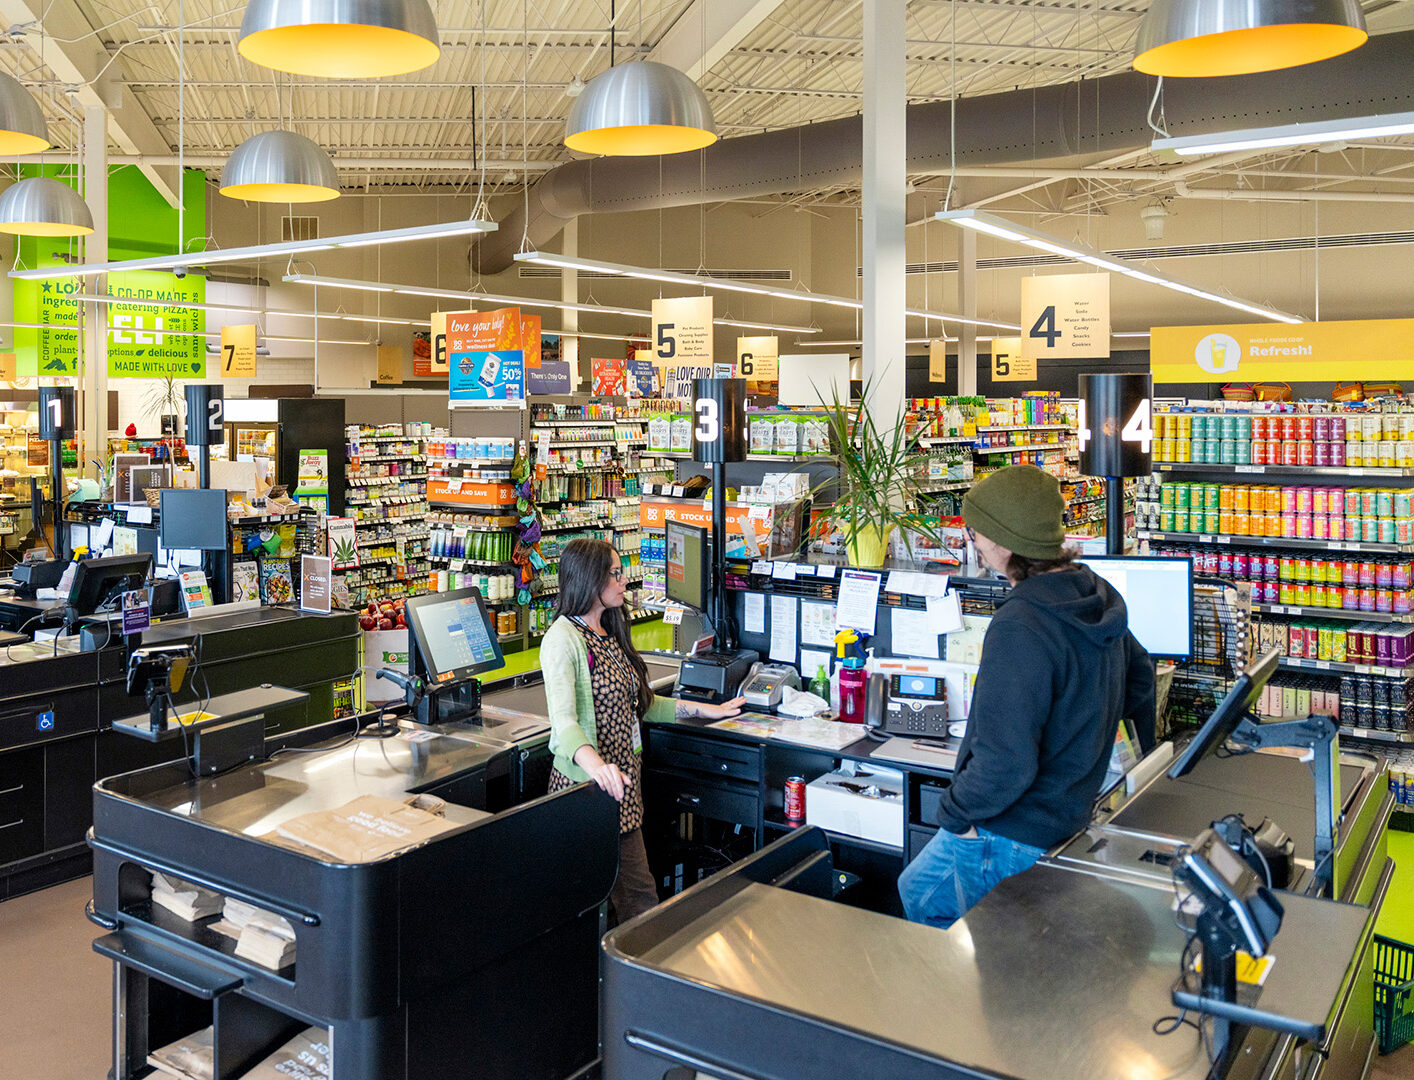 A bright, modern Whole Foods Coop checkout area in Duluth, MN features multiple conveyor belt lanes. Three cashiers are visible, each assisting different customers. Overhead lighting is contemporary, and the store's shelves are stocked with various items in the background.